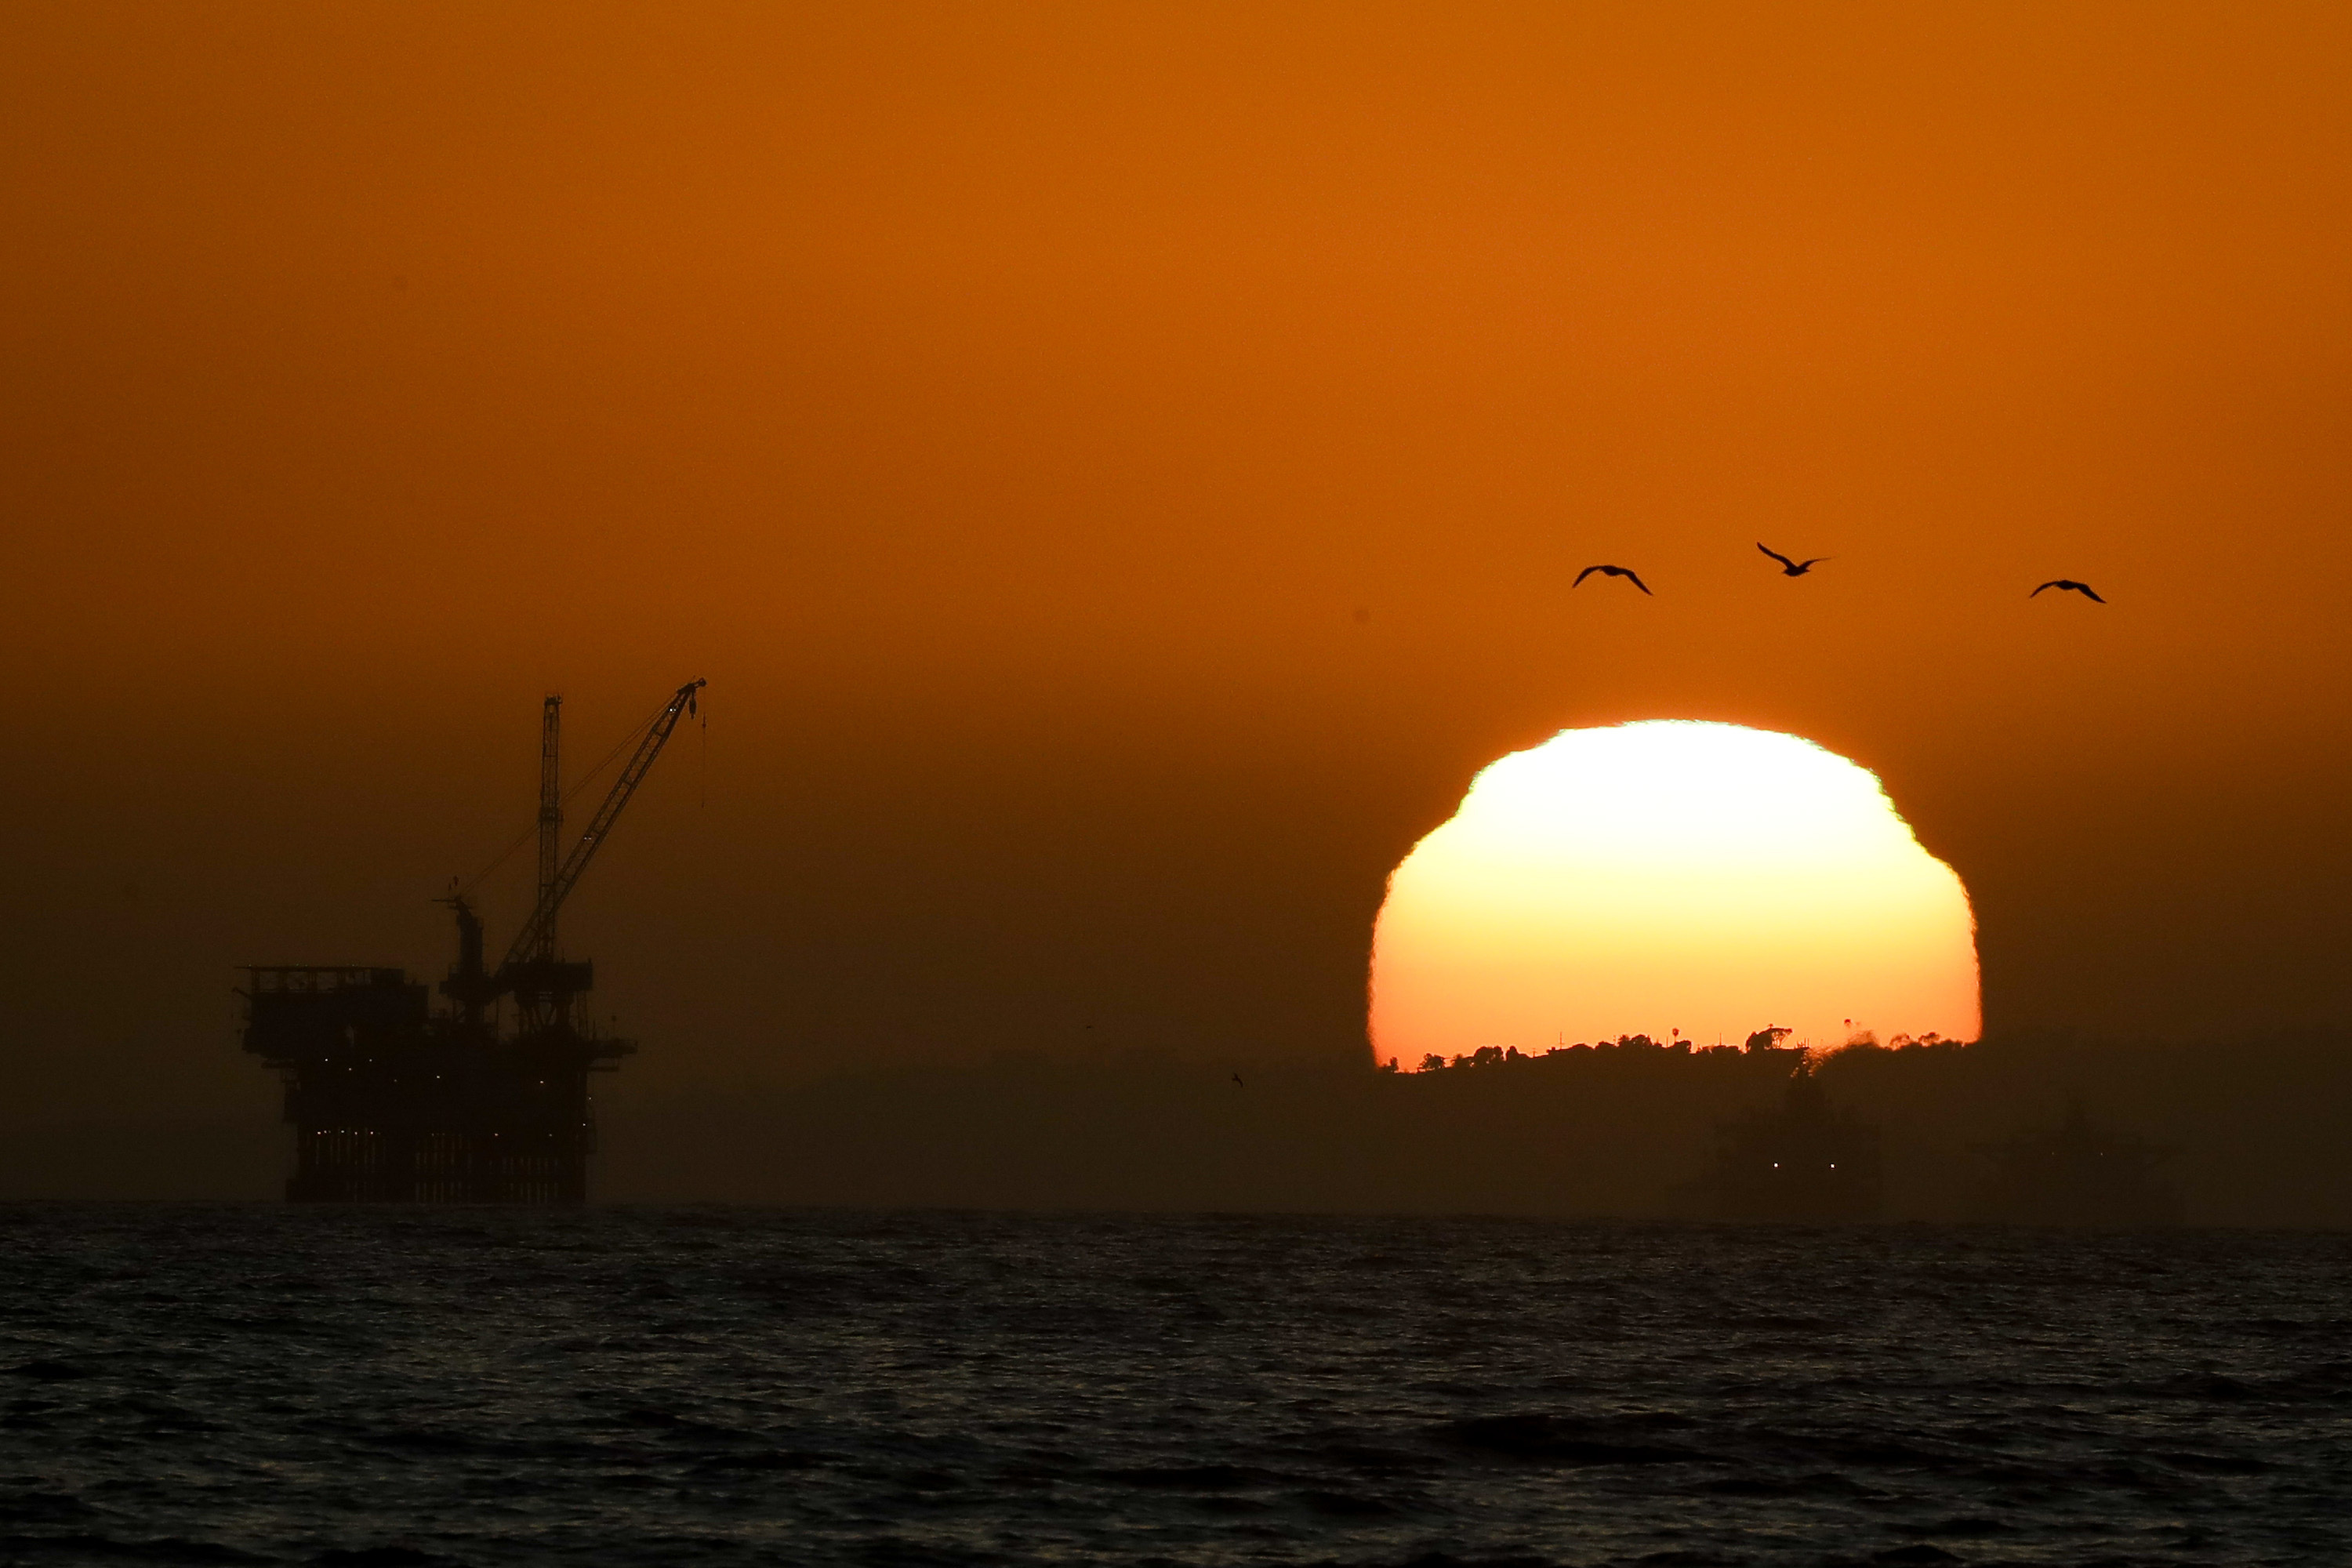 Offshore oil drilling platforms are seen Tuesday, April 21, 2020, in Huntington Beach, Calif. Oil prices continue to drop, because very few people are flying or driving, and factories have shut amid widespread stay-at-home orders due to the coronavirus concerns. (AP Photo/Chris Carlson)